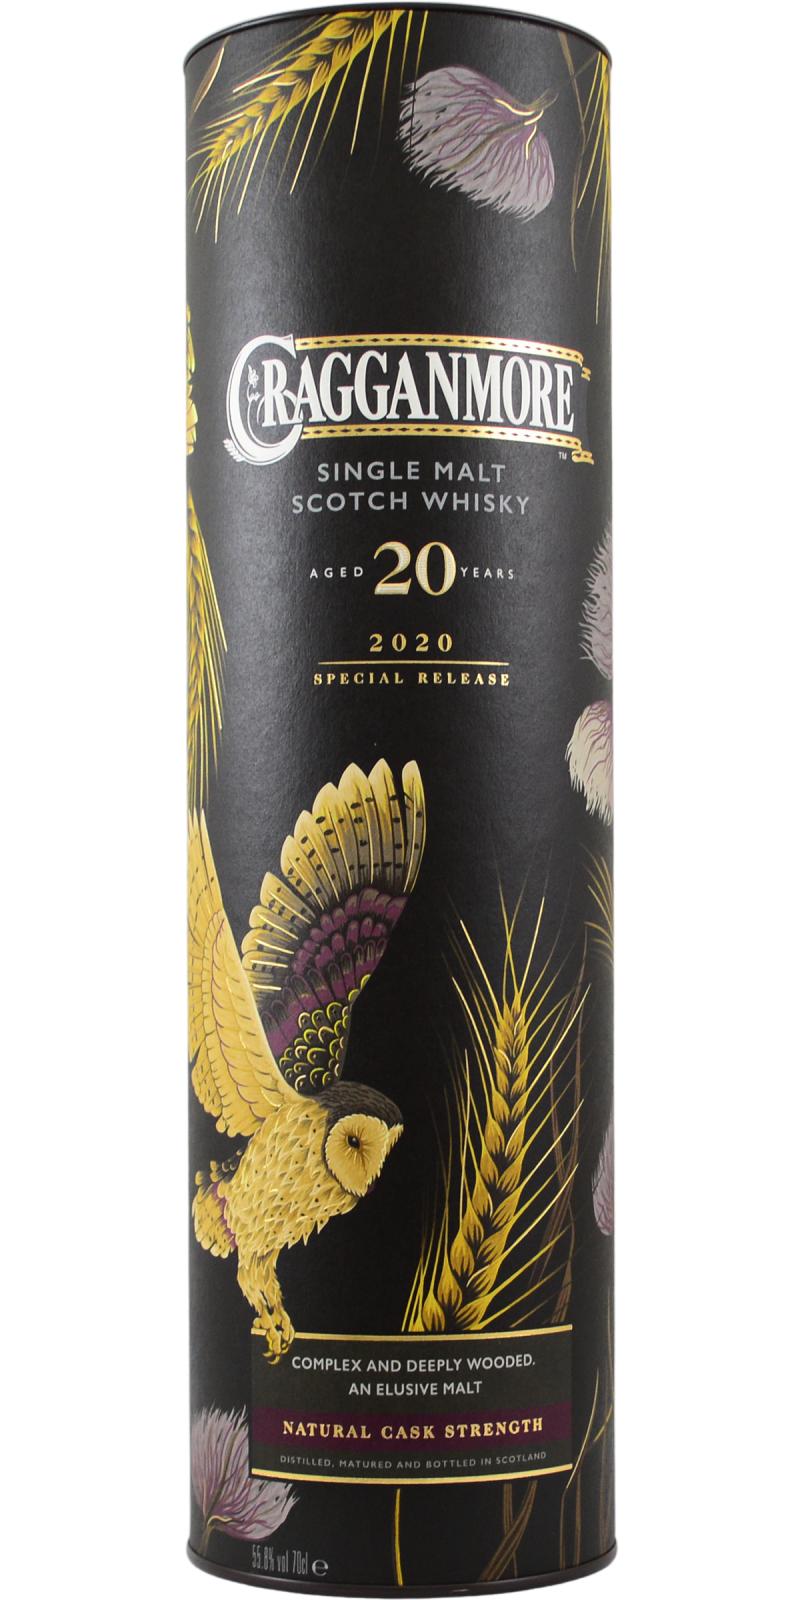 Cragganmore 20-year-old